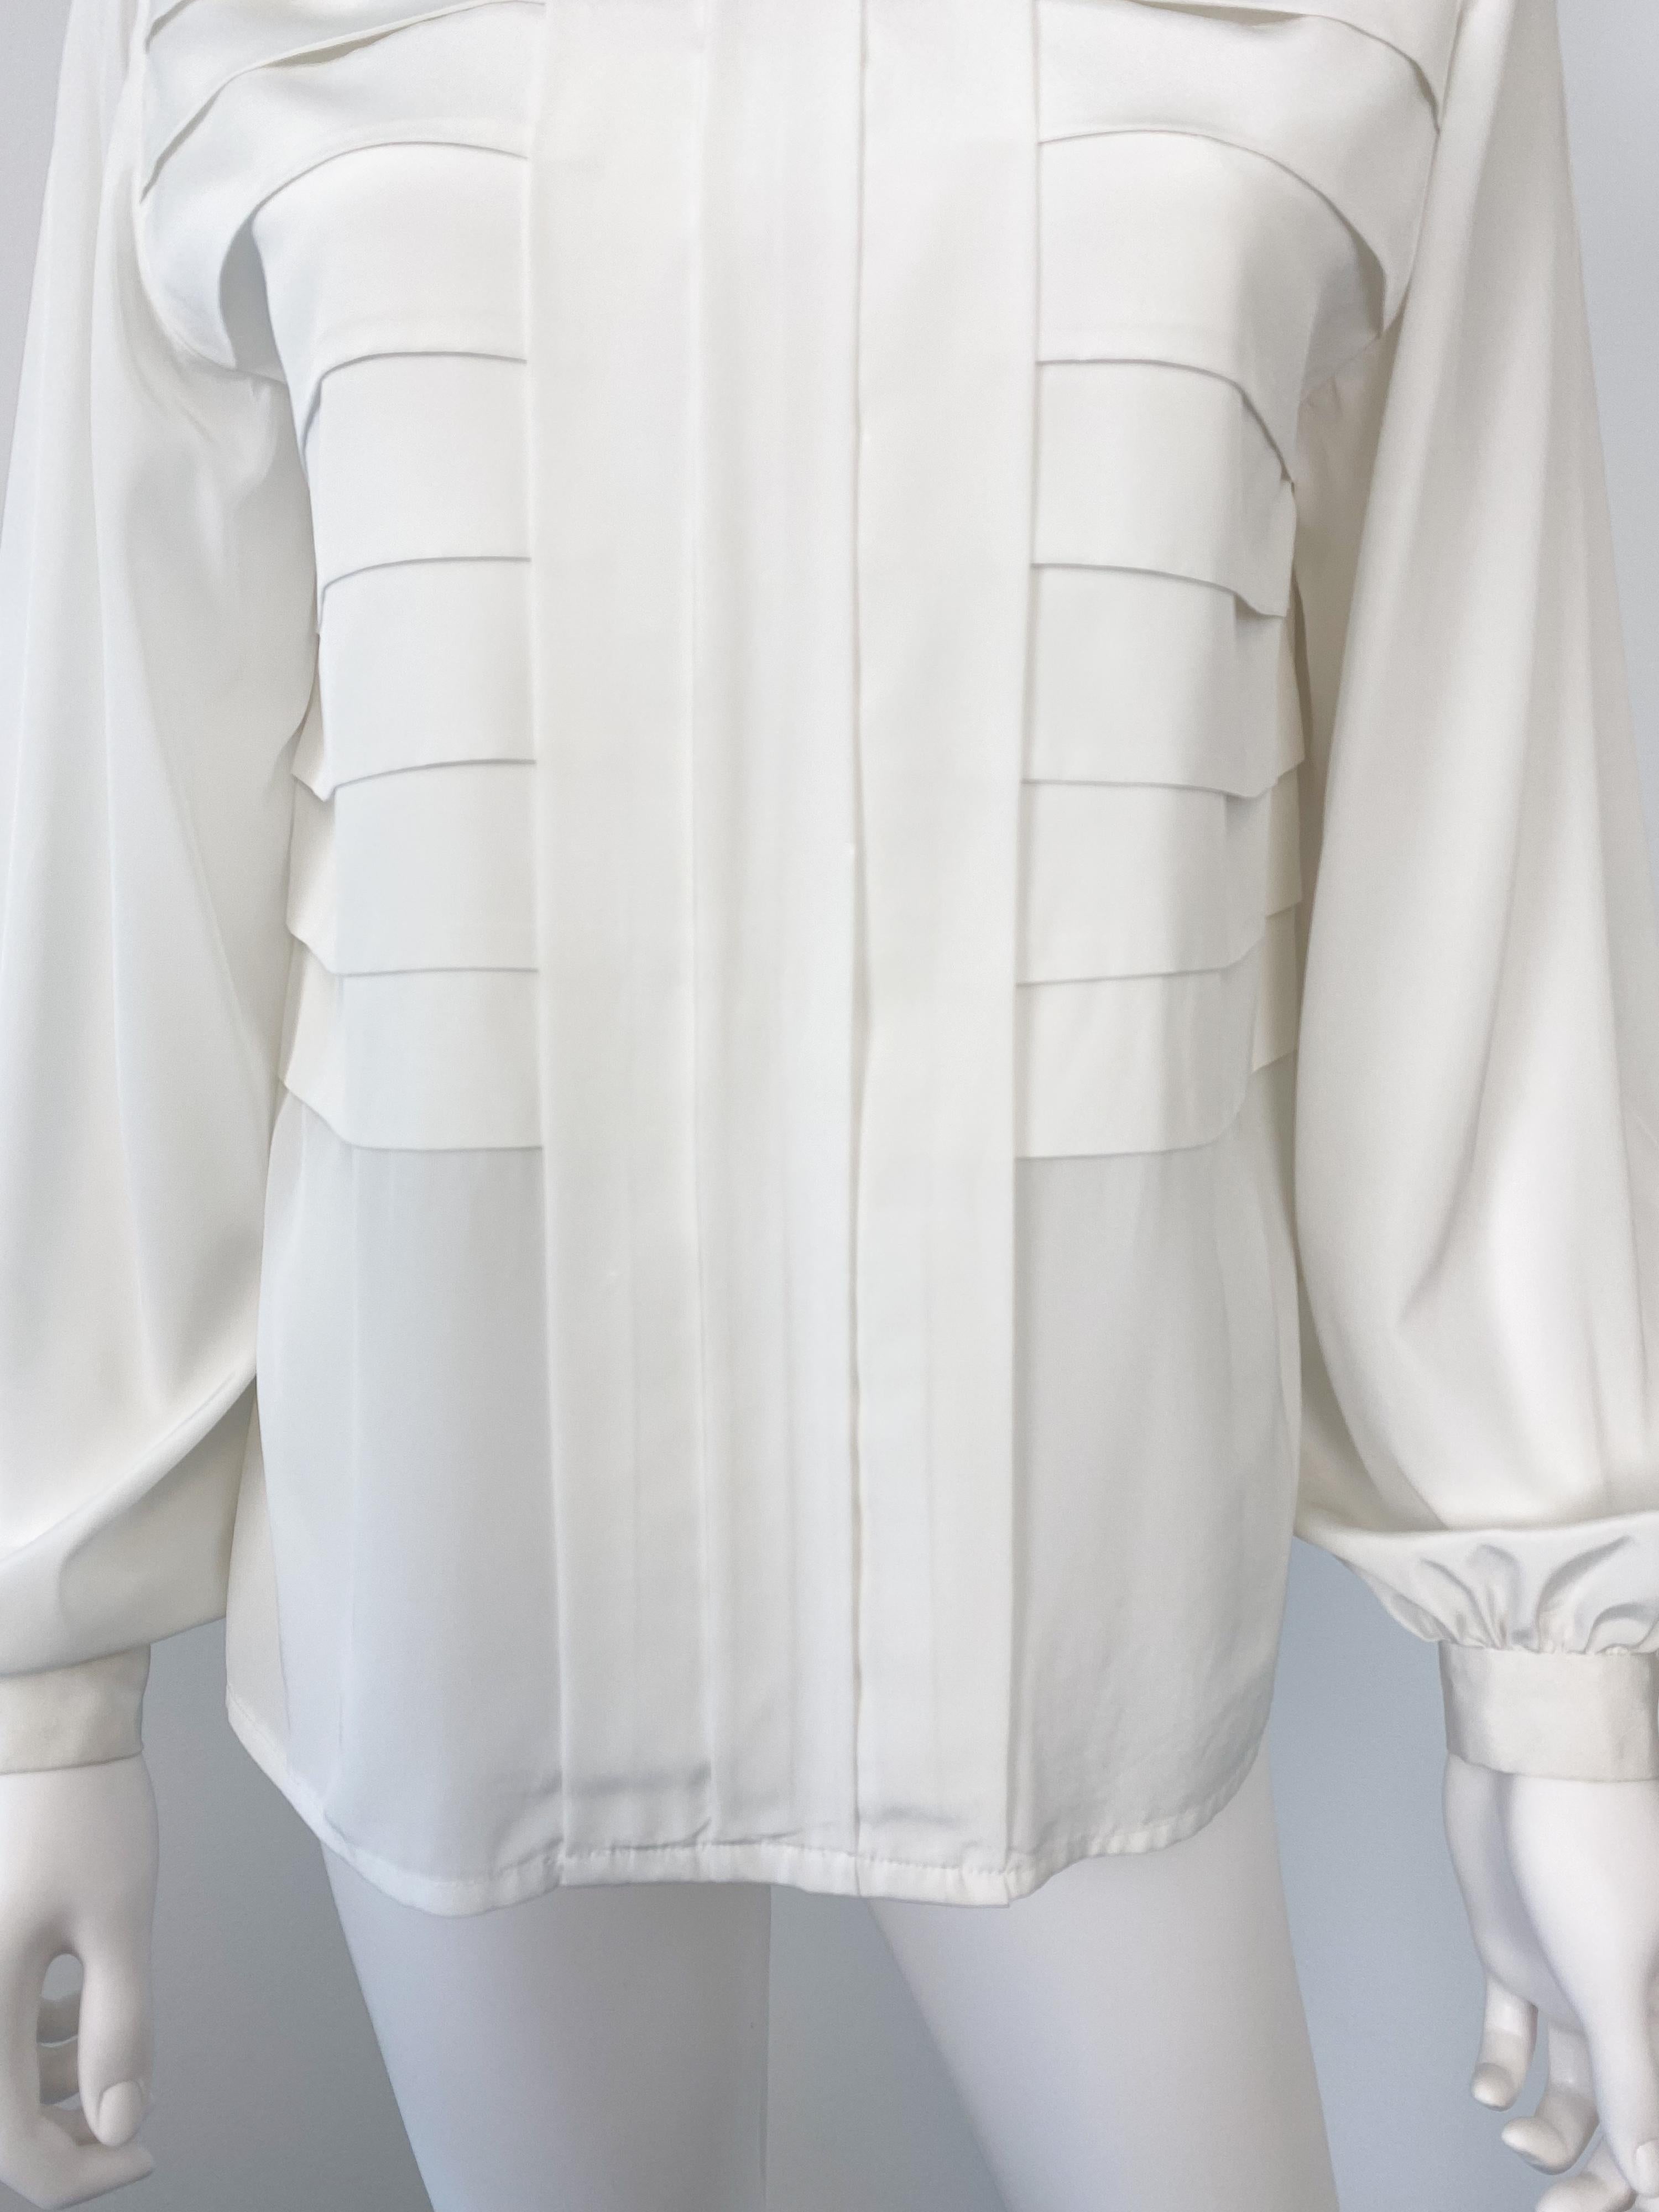 Women's or Men's Vintage 1970s Silky Polyester Blouse Top White Origami Pleat Size 10/12 For Sale